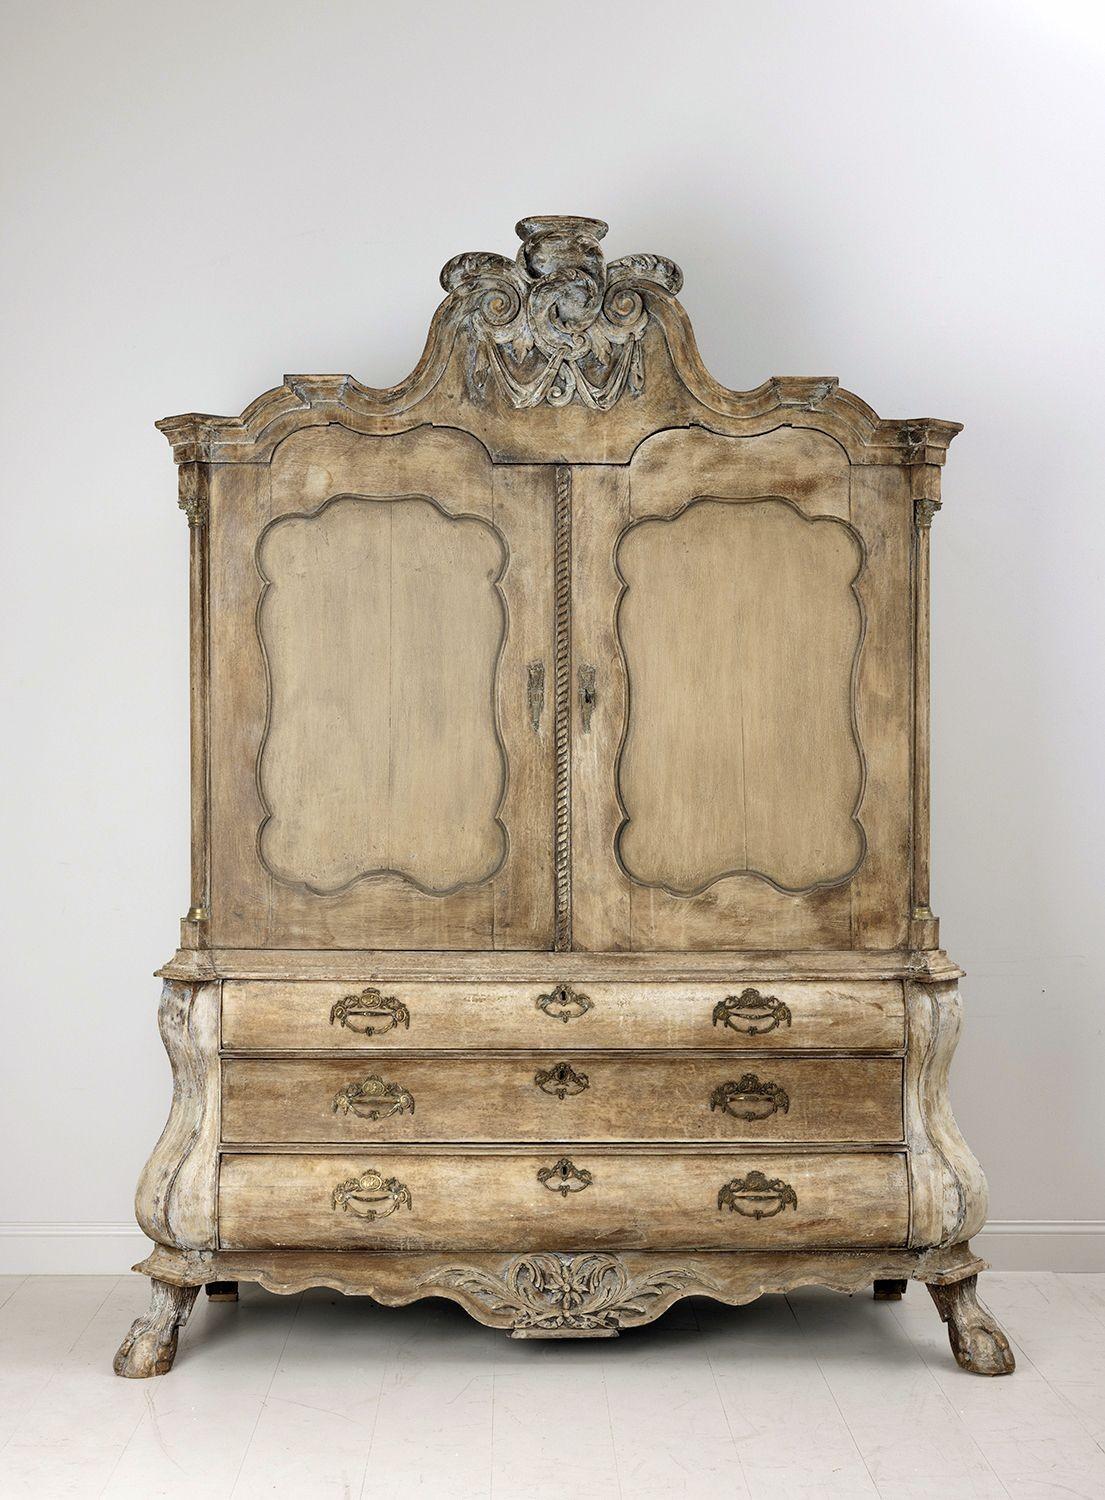 A rare and impressive hand-carved cabinet with original brass hardware, Corinthian capitals, and column base escutcheon caps. This 18th c. Dutch oak linen press from the Rococo period has been hand-scraped to the original paint with later paint on